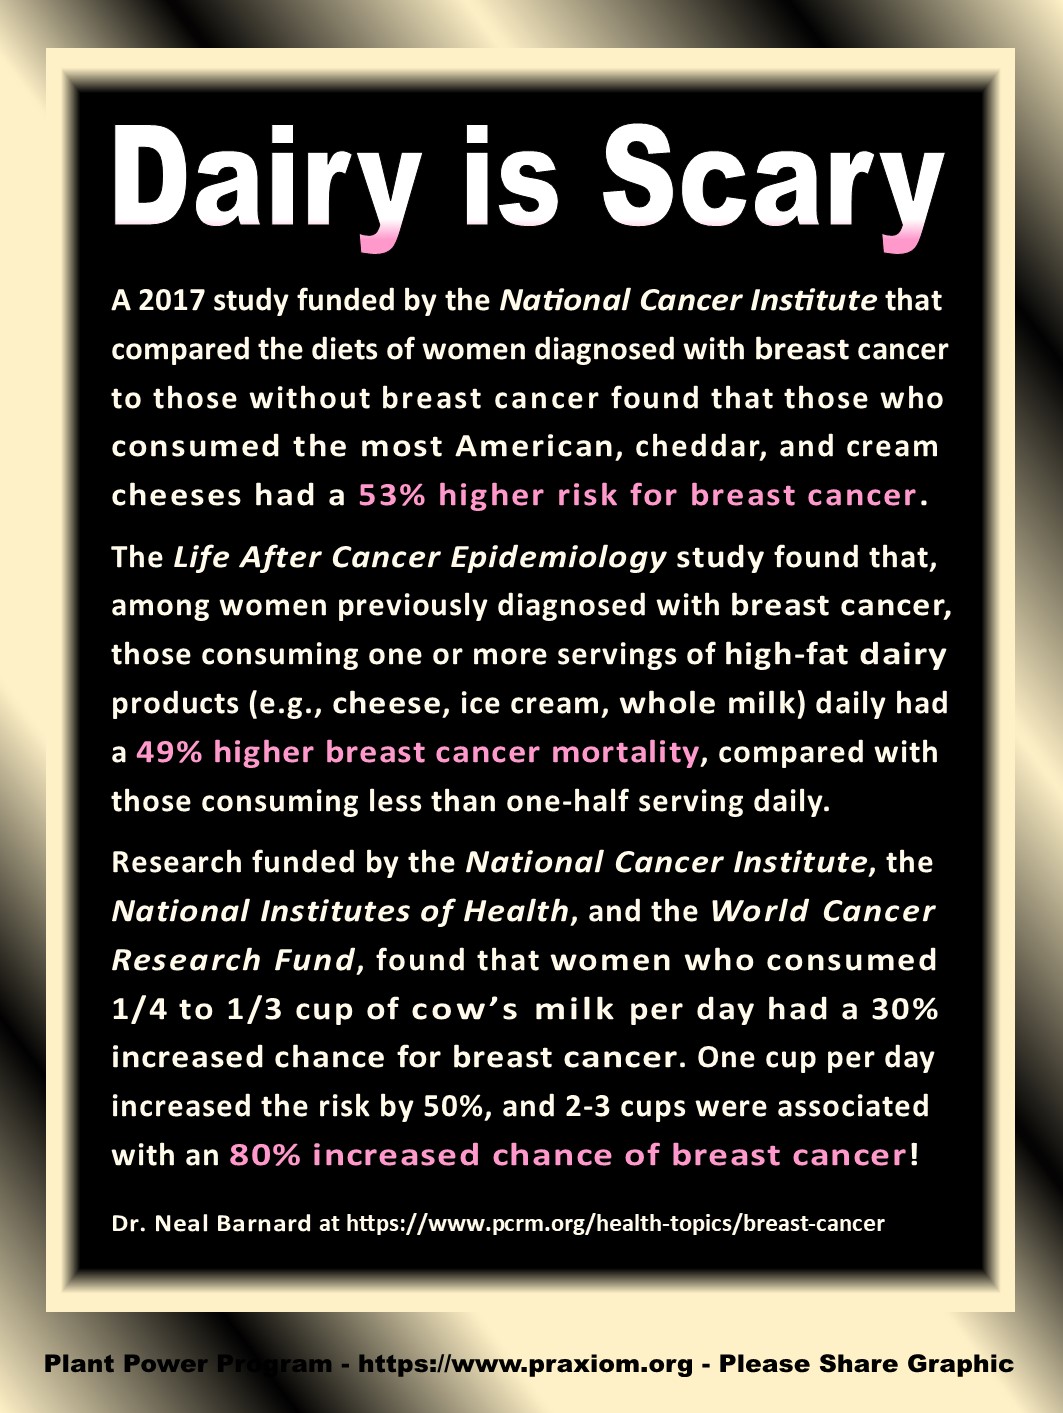 Dairy is Scary - Dr. Neal Barnard